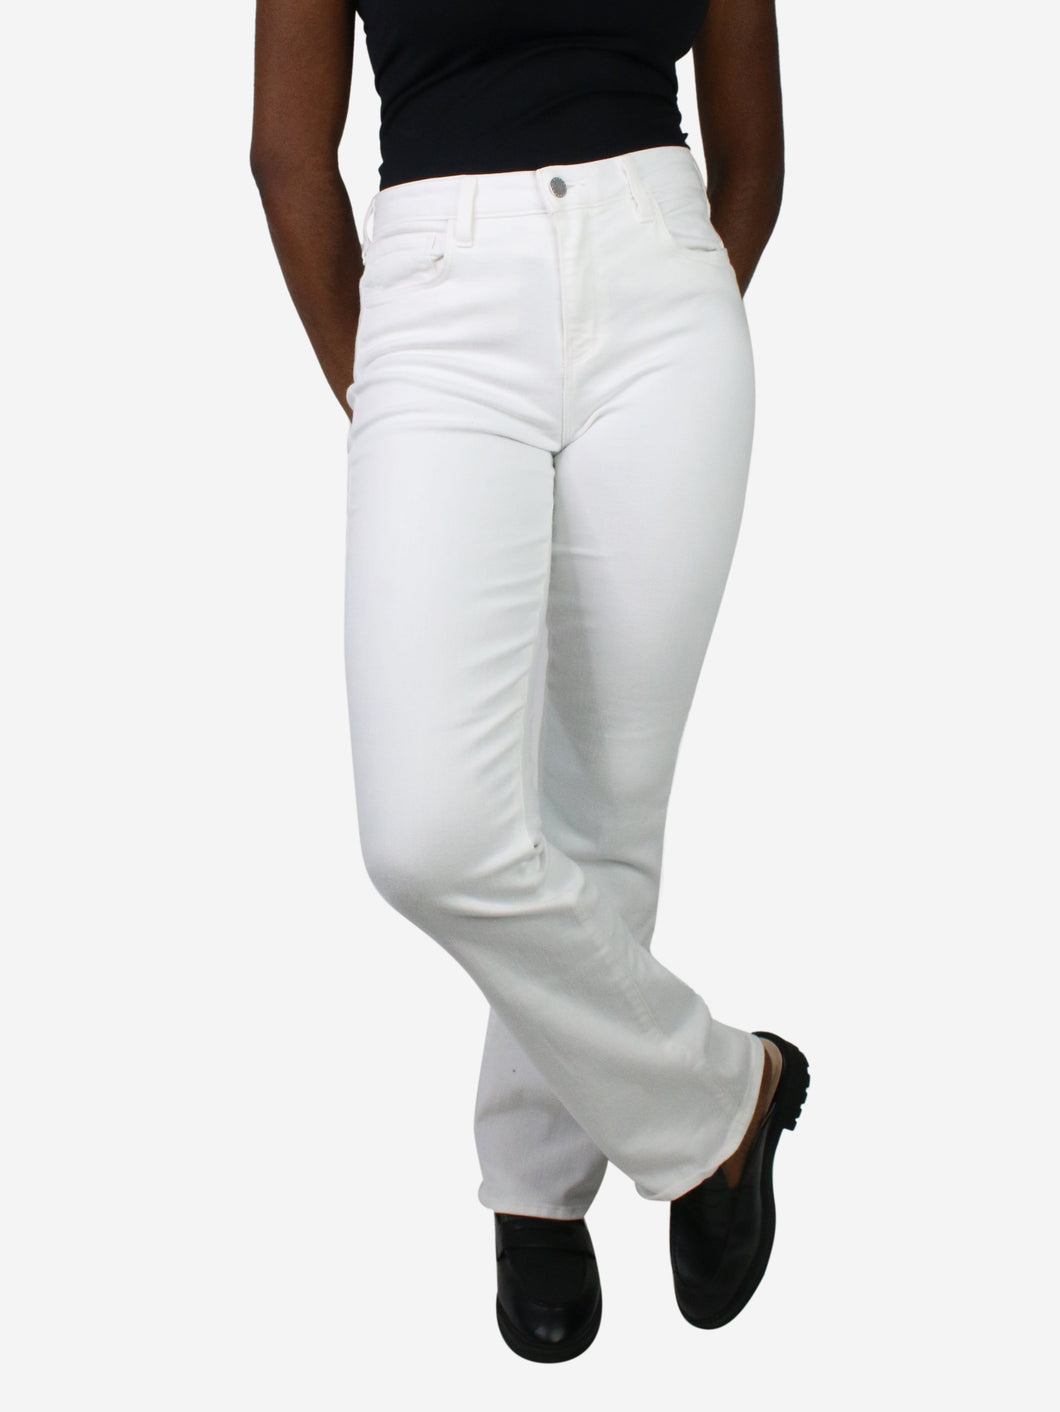 White jeans - size W28 Trousers L'Agence 